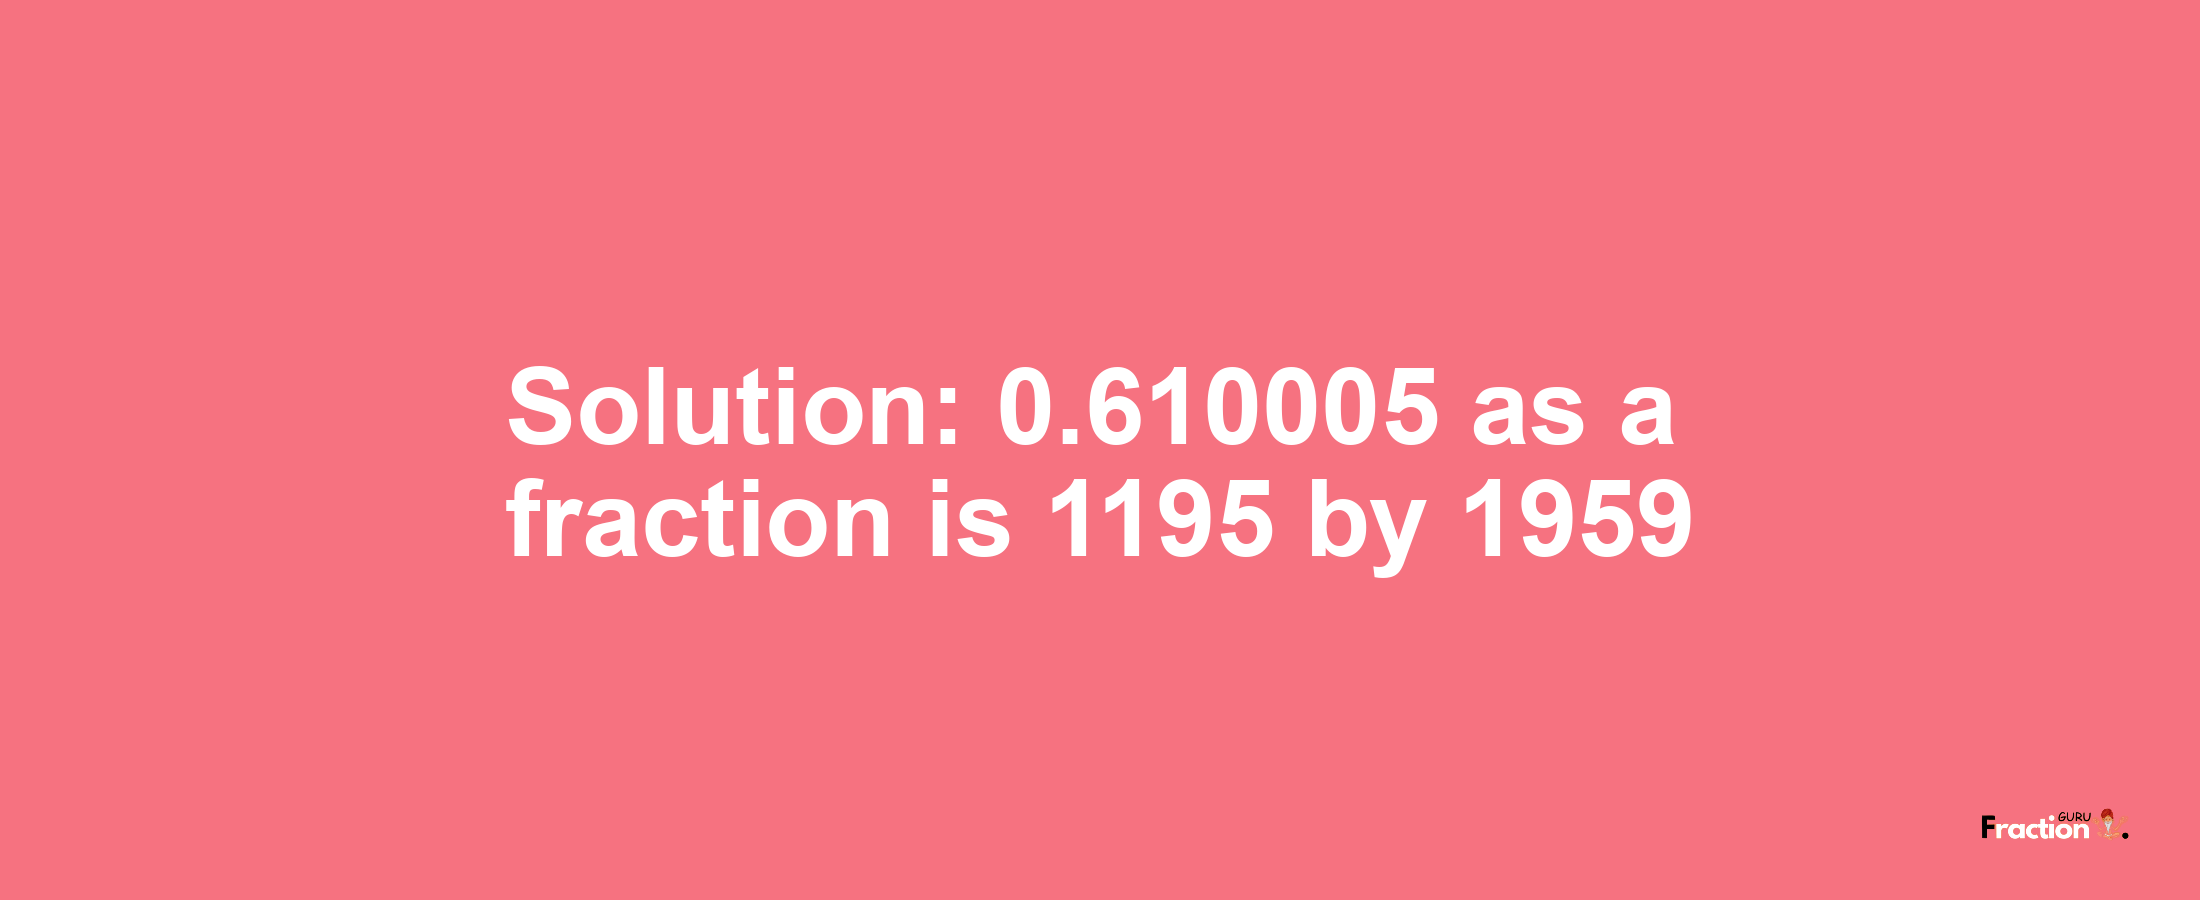 Solution:0.610005 as a fraction is 1195/1959